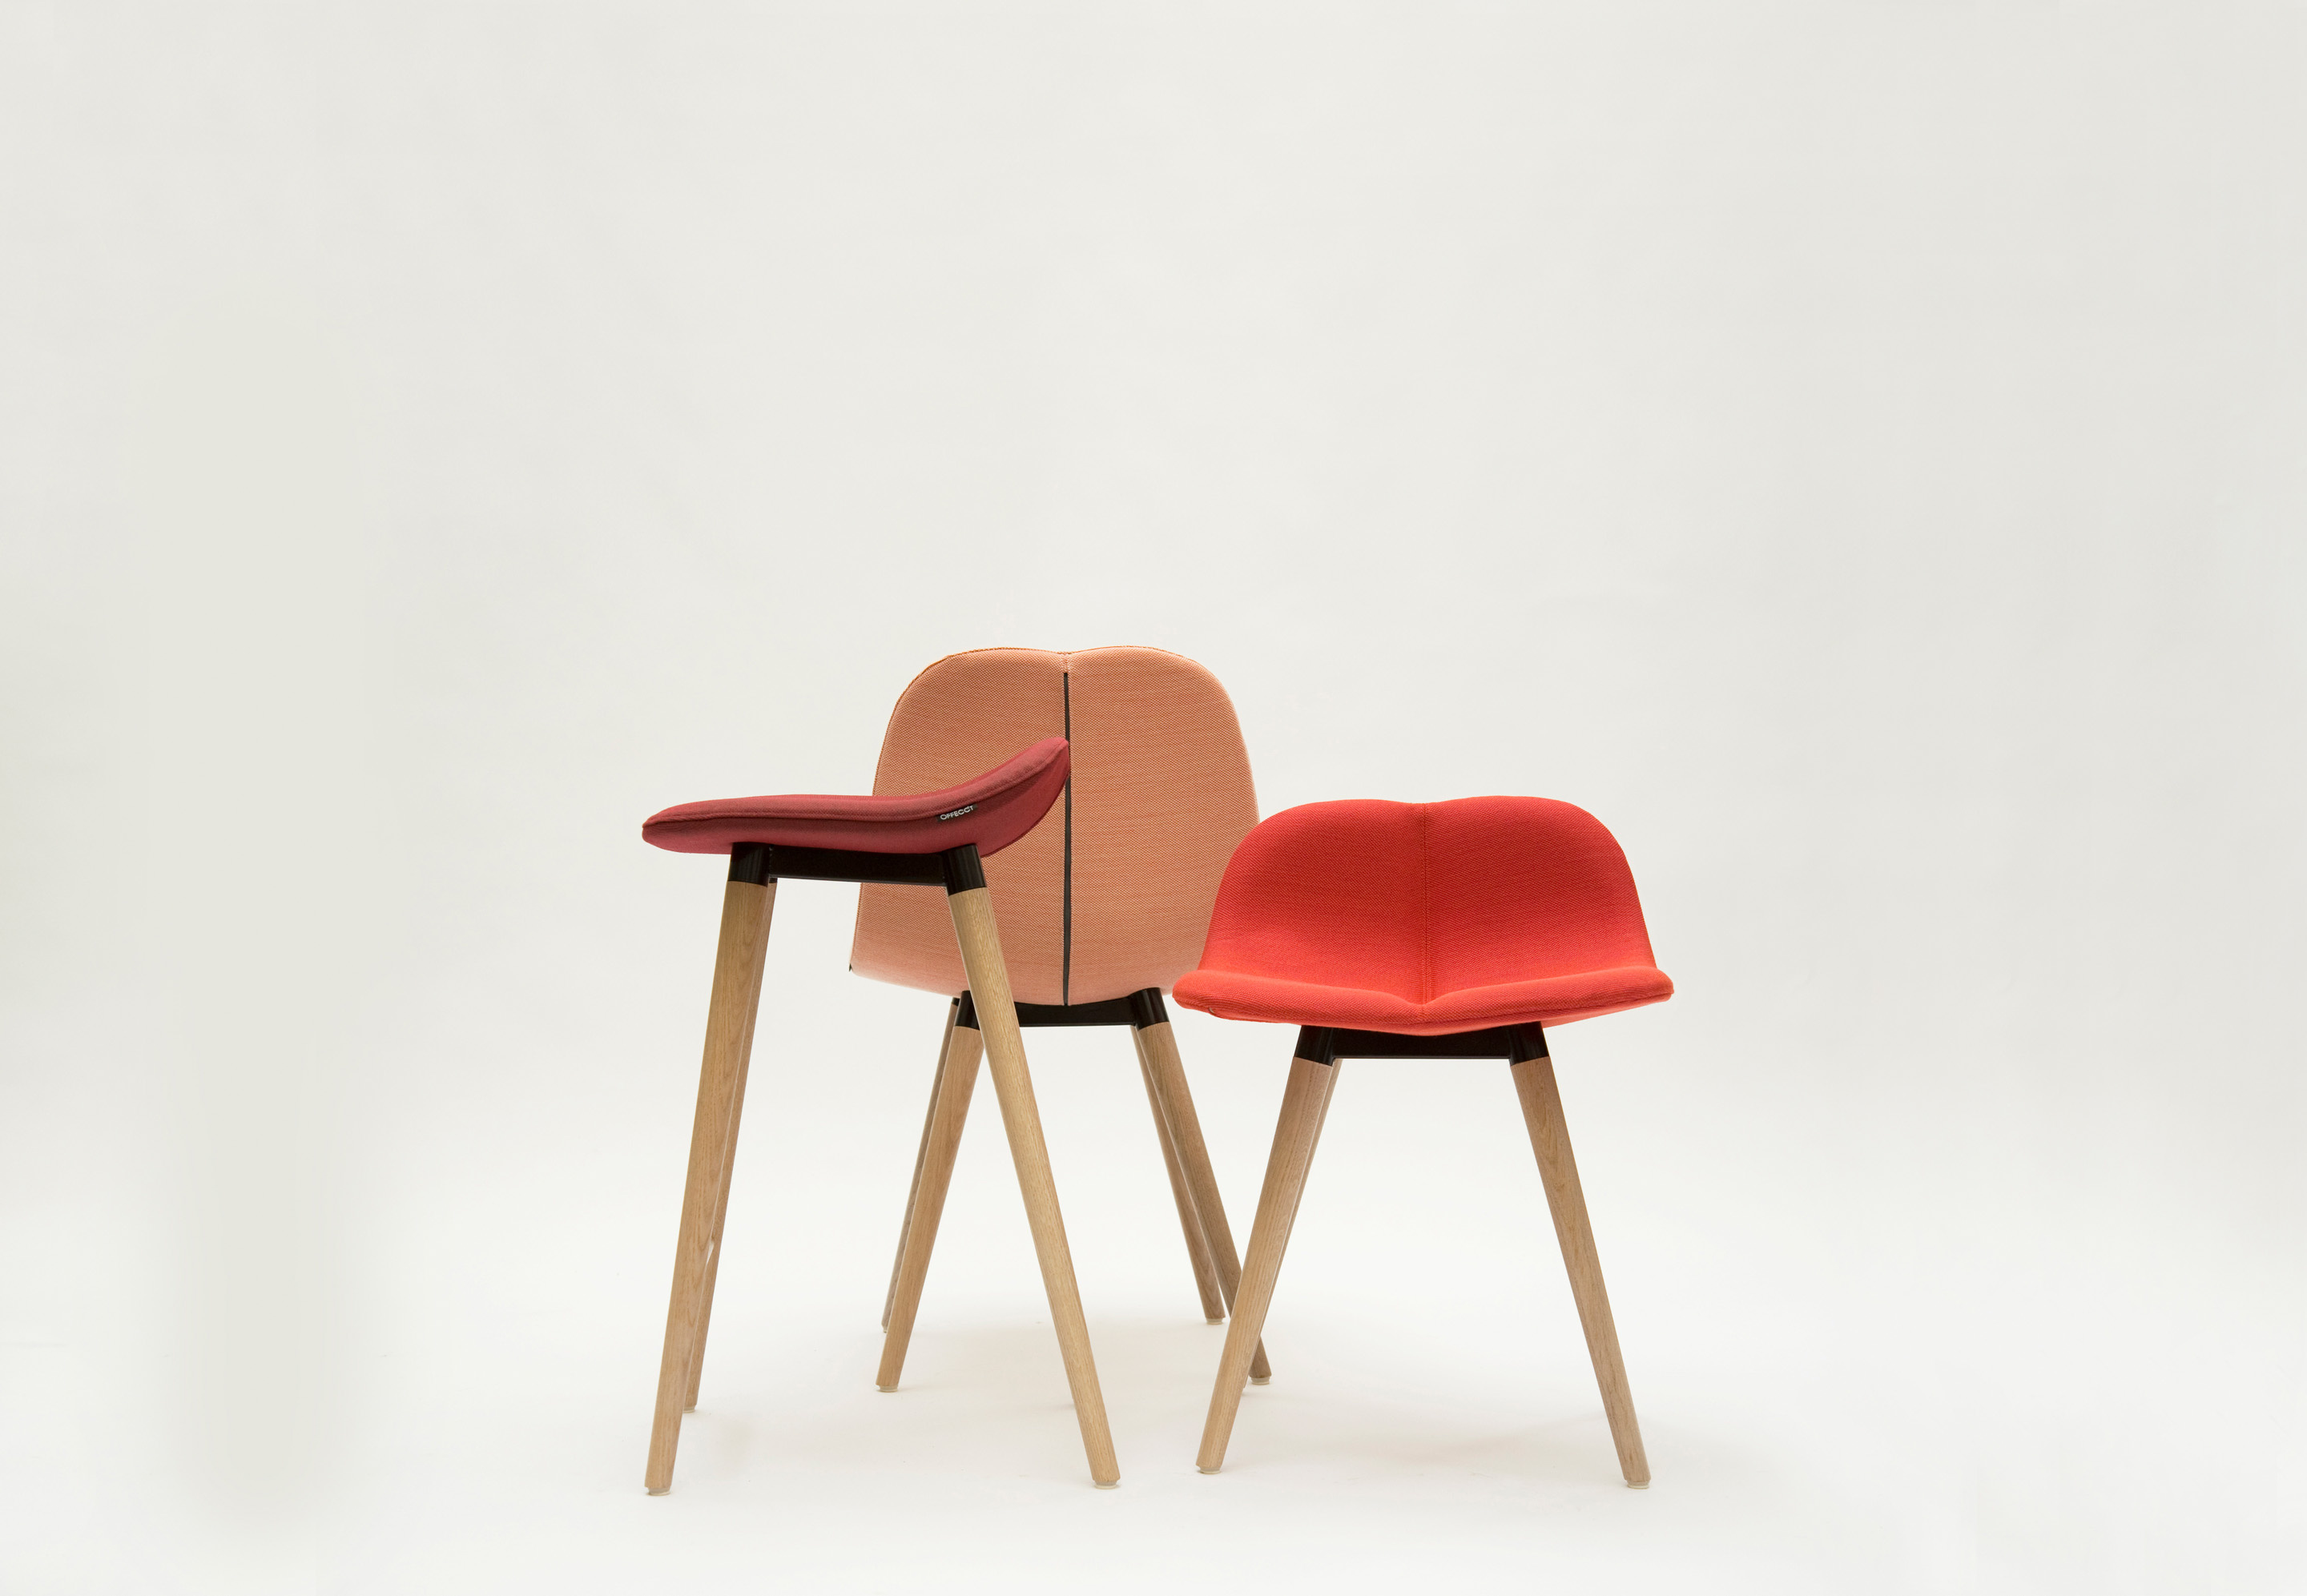  - Duo chair